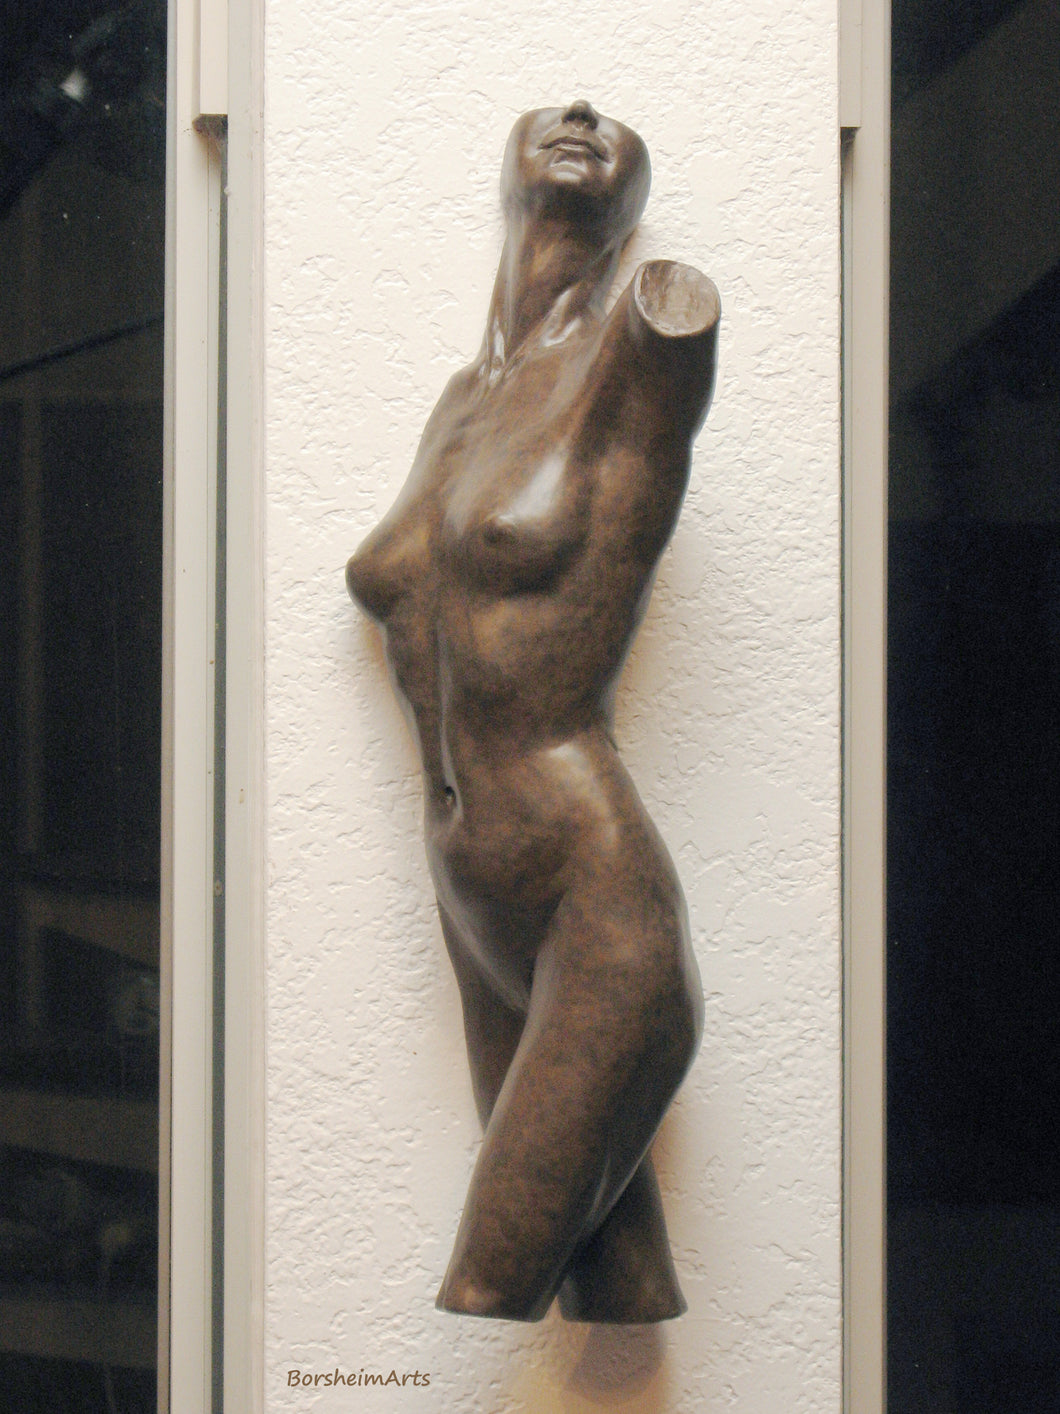 Tucking a little bronze wall art nude in the support wall between a house full of windows.  Great wall-mounted bronze figure for narrow walls.